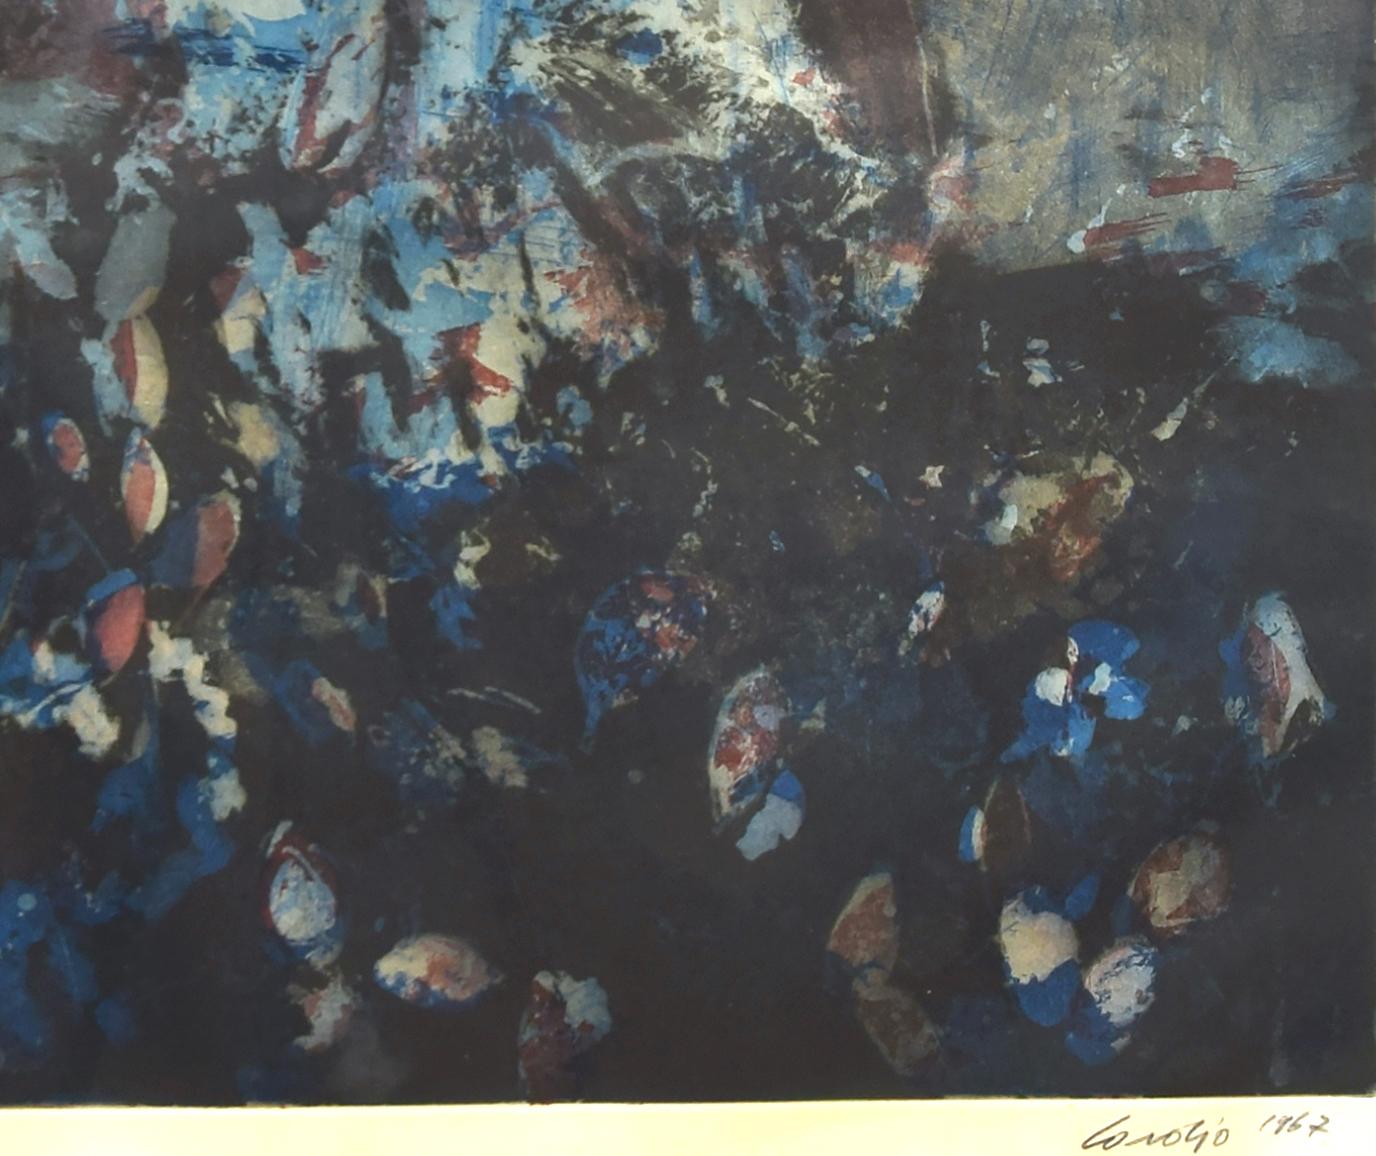 Image dimensions: 48 x 64

Flower Composition is an original mixed color etching realized by Nino Cordio in 1967.

Hand signed and dated on the lower right margin. 

Numbered on the lower left margin. Ed. 1/14.

Image dimensions: 48 x 64